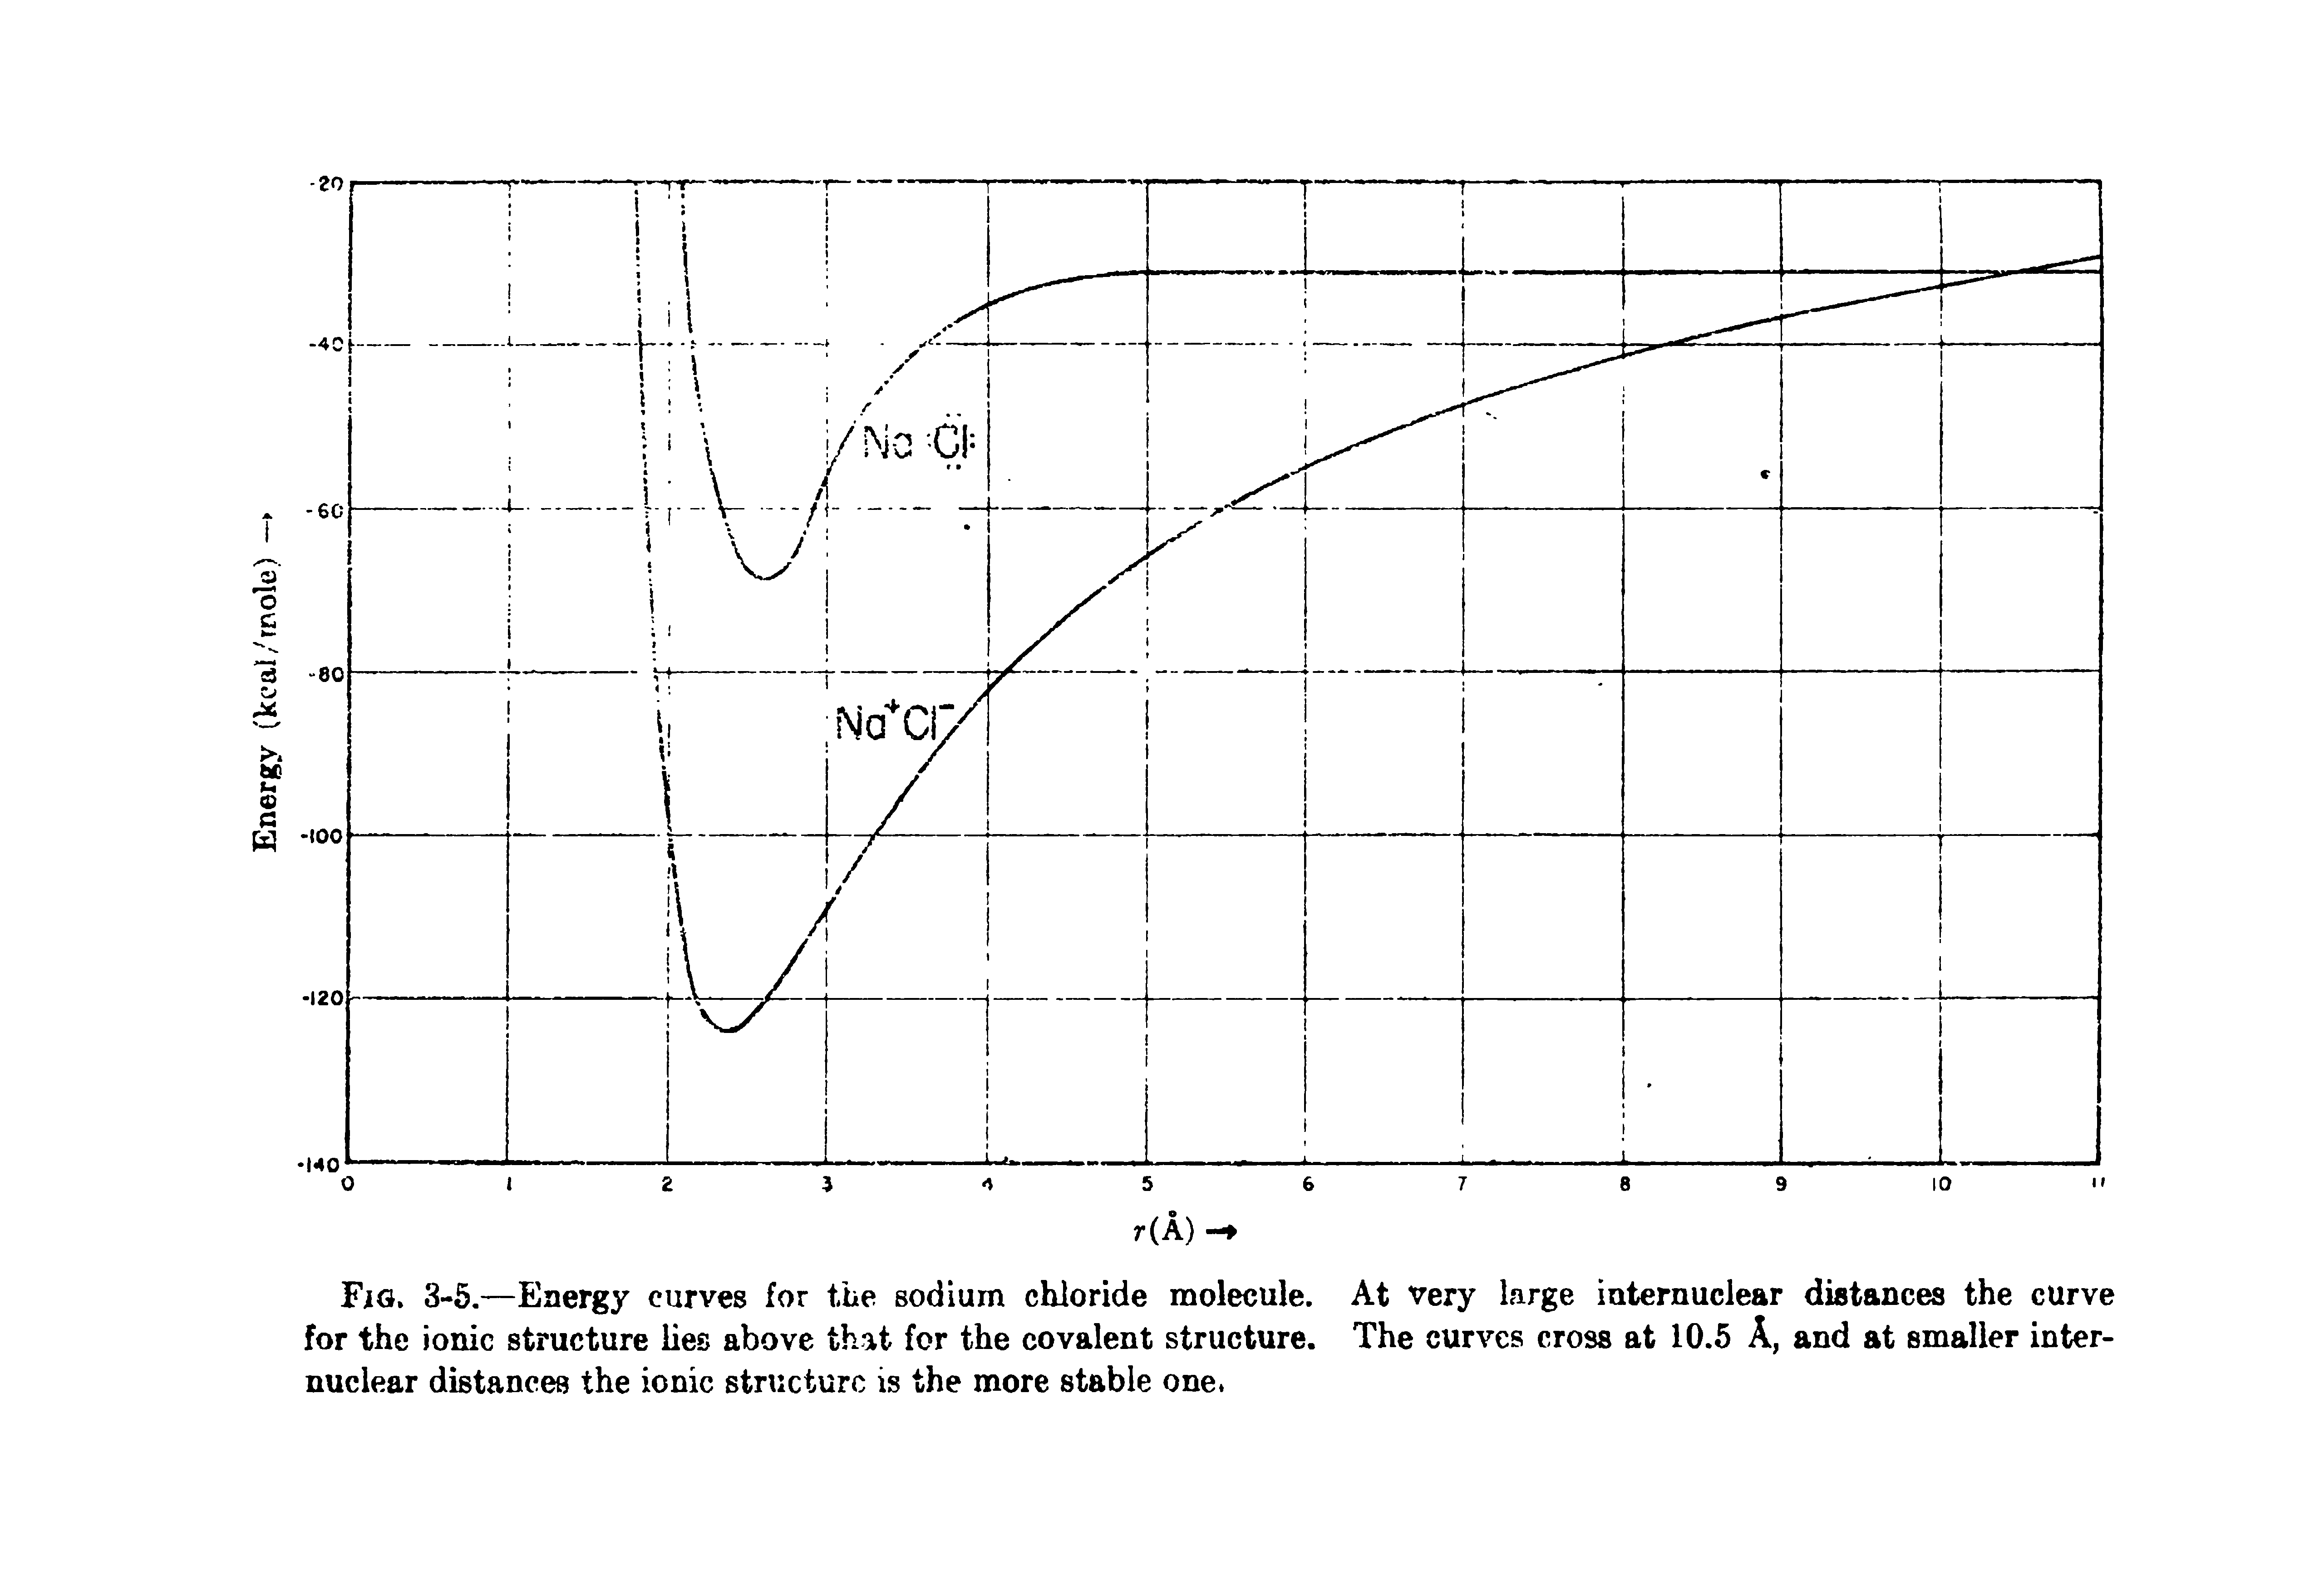 Fig. 3-5.—Energy curves for the sodium chloride molecule. At very large internuclear distances the curve for the ionic structure lies above that for the covalent structure. The curves cross at 10.5 A, and at smaller inter-nuclear distances the ionic structure is the more stable one ...